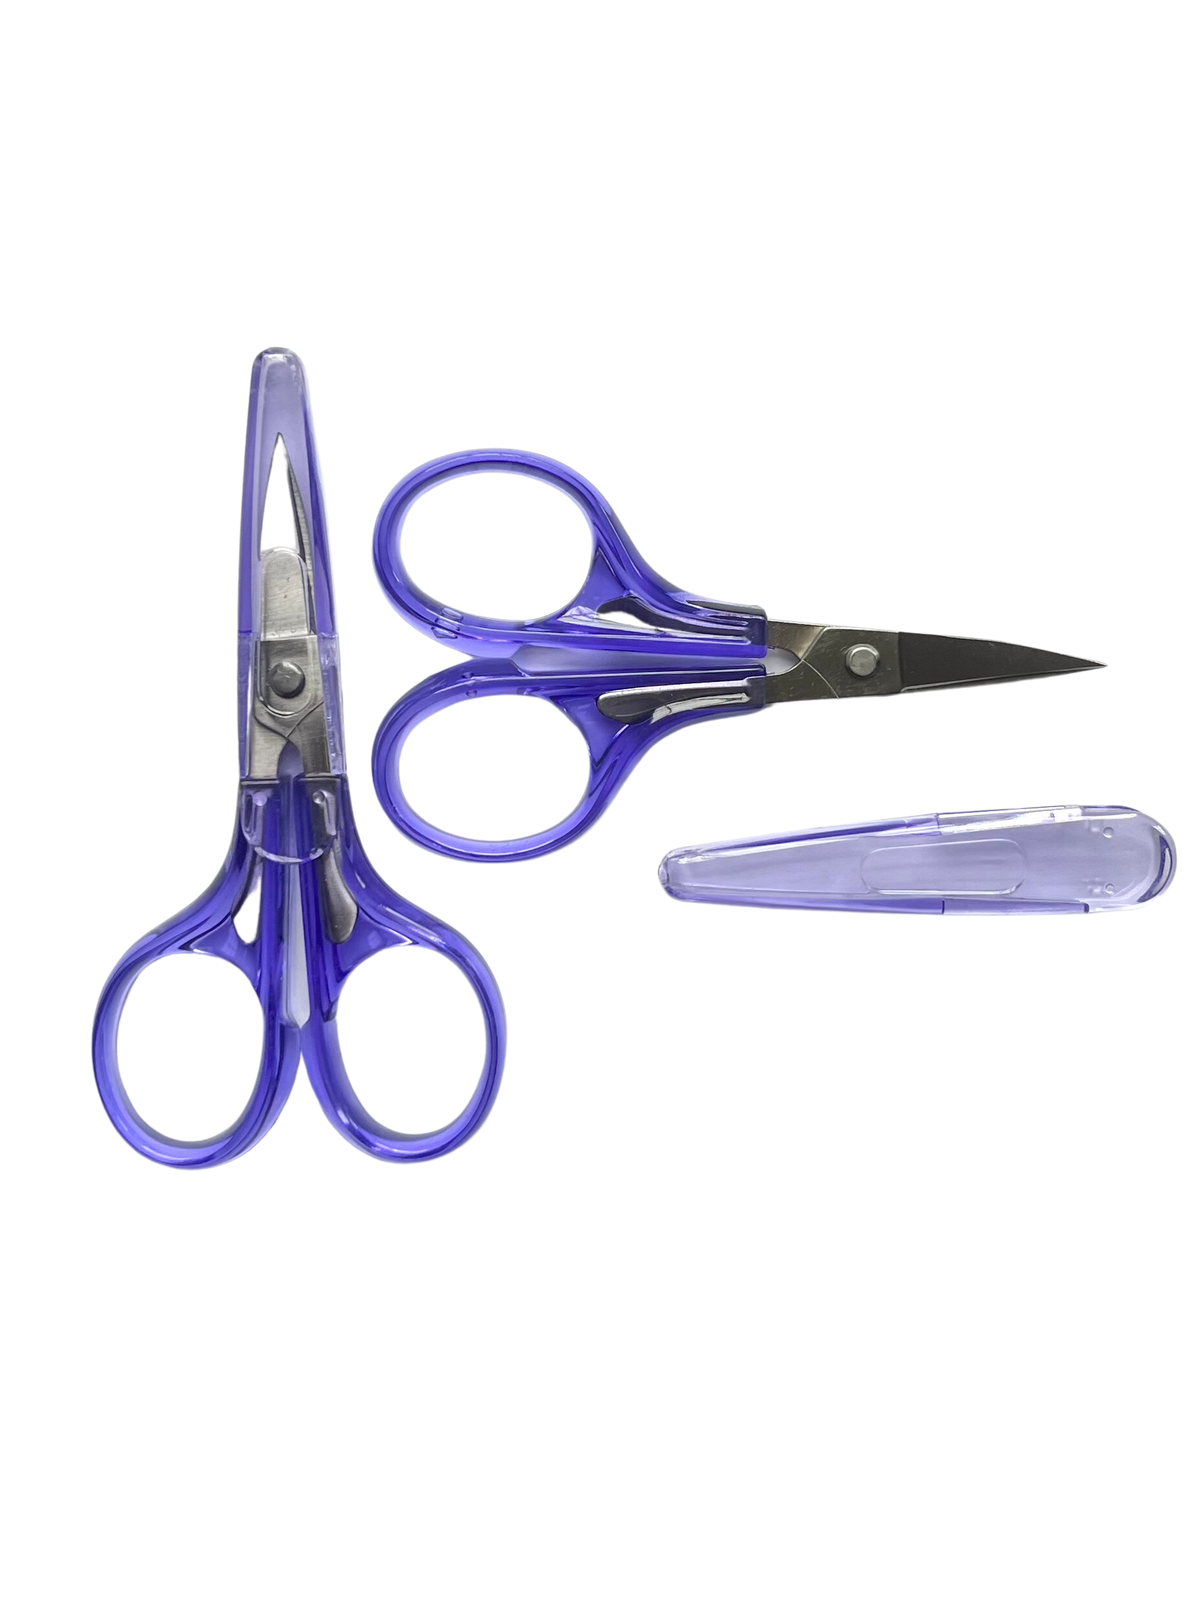 Lilac Curved Blade Needlepoint Scissors with Cap - TSA Approved